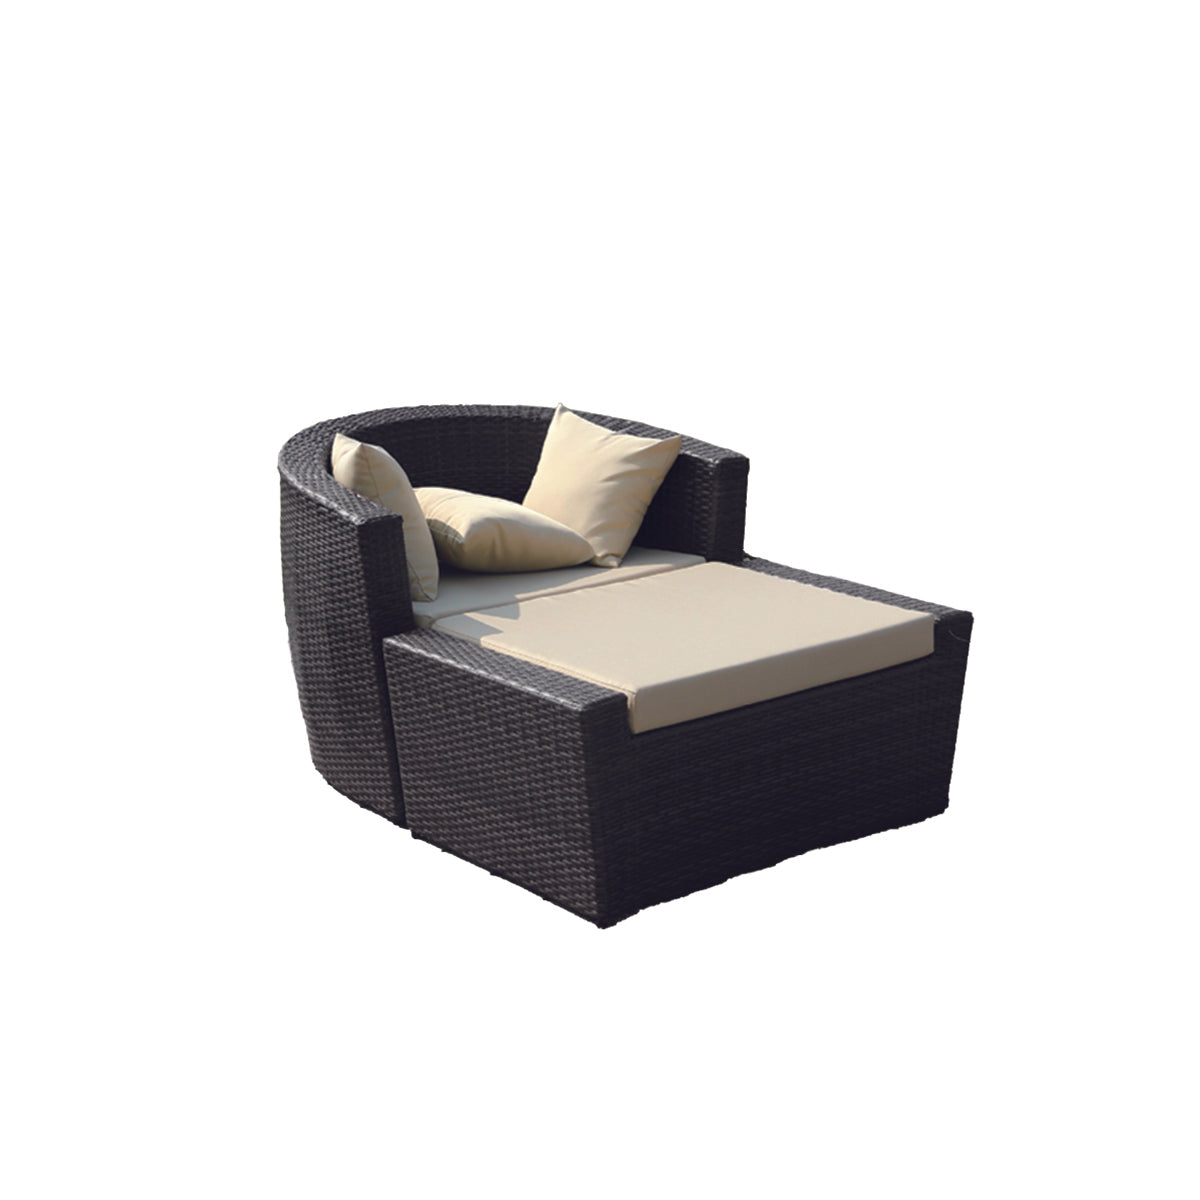 Sofa Chairs with Ottoman in Wicker <br>(VL 205)